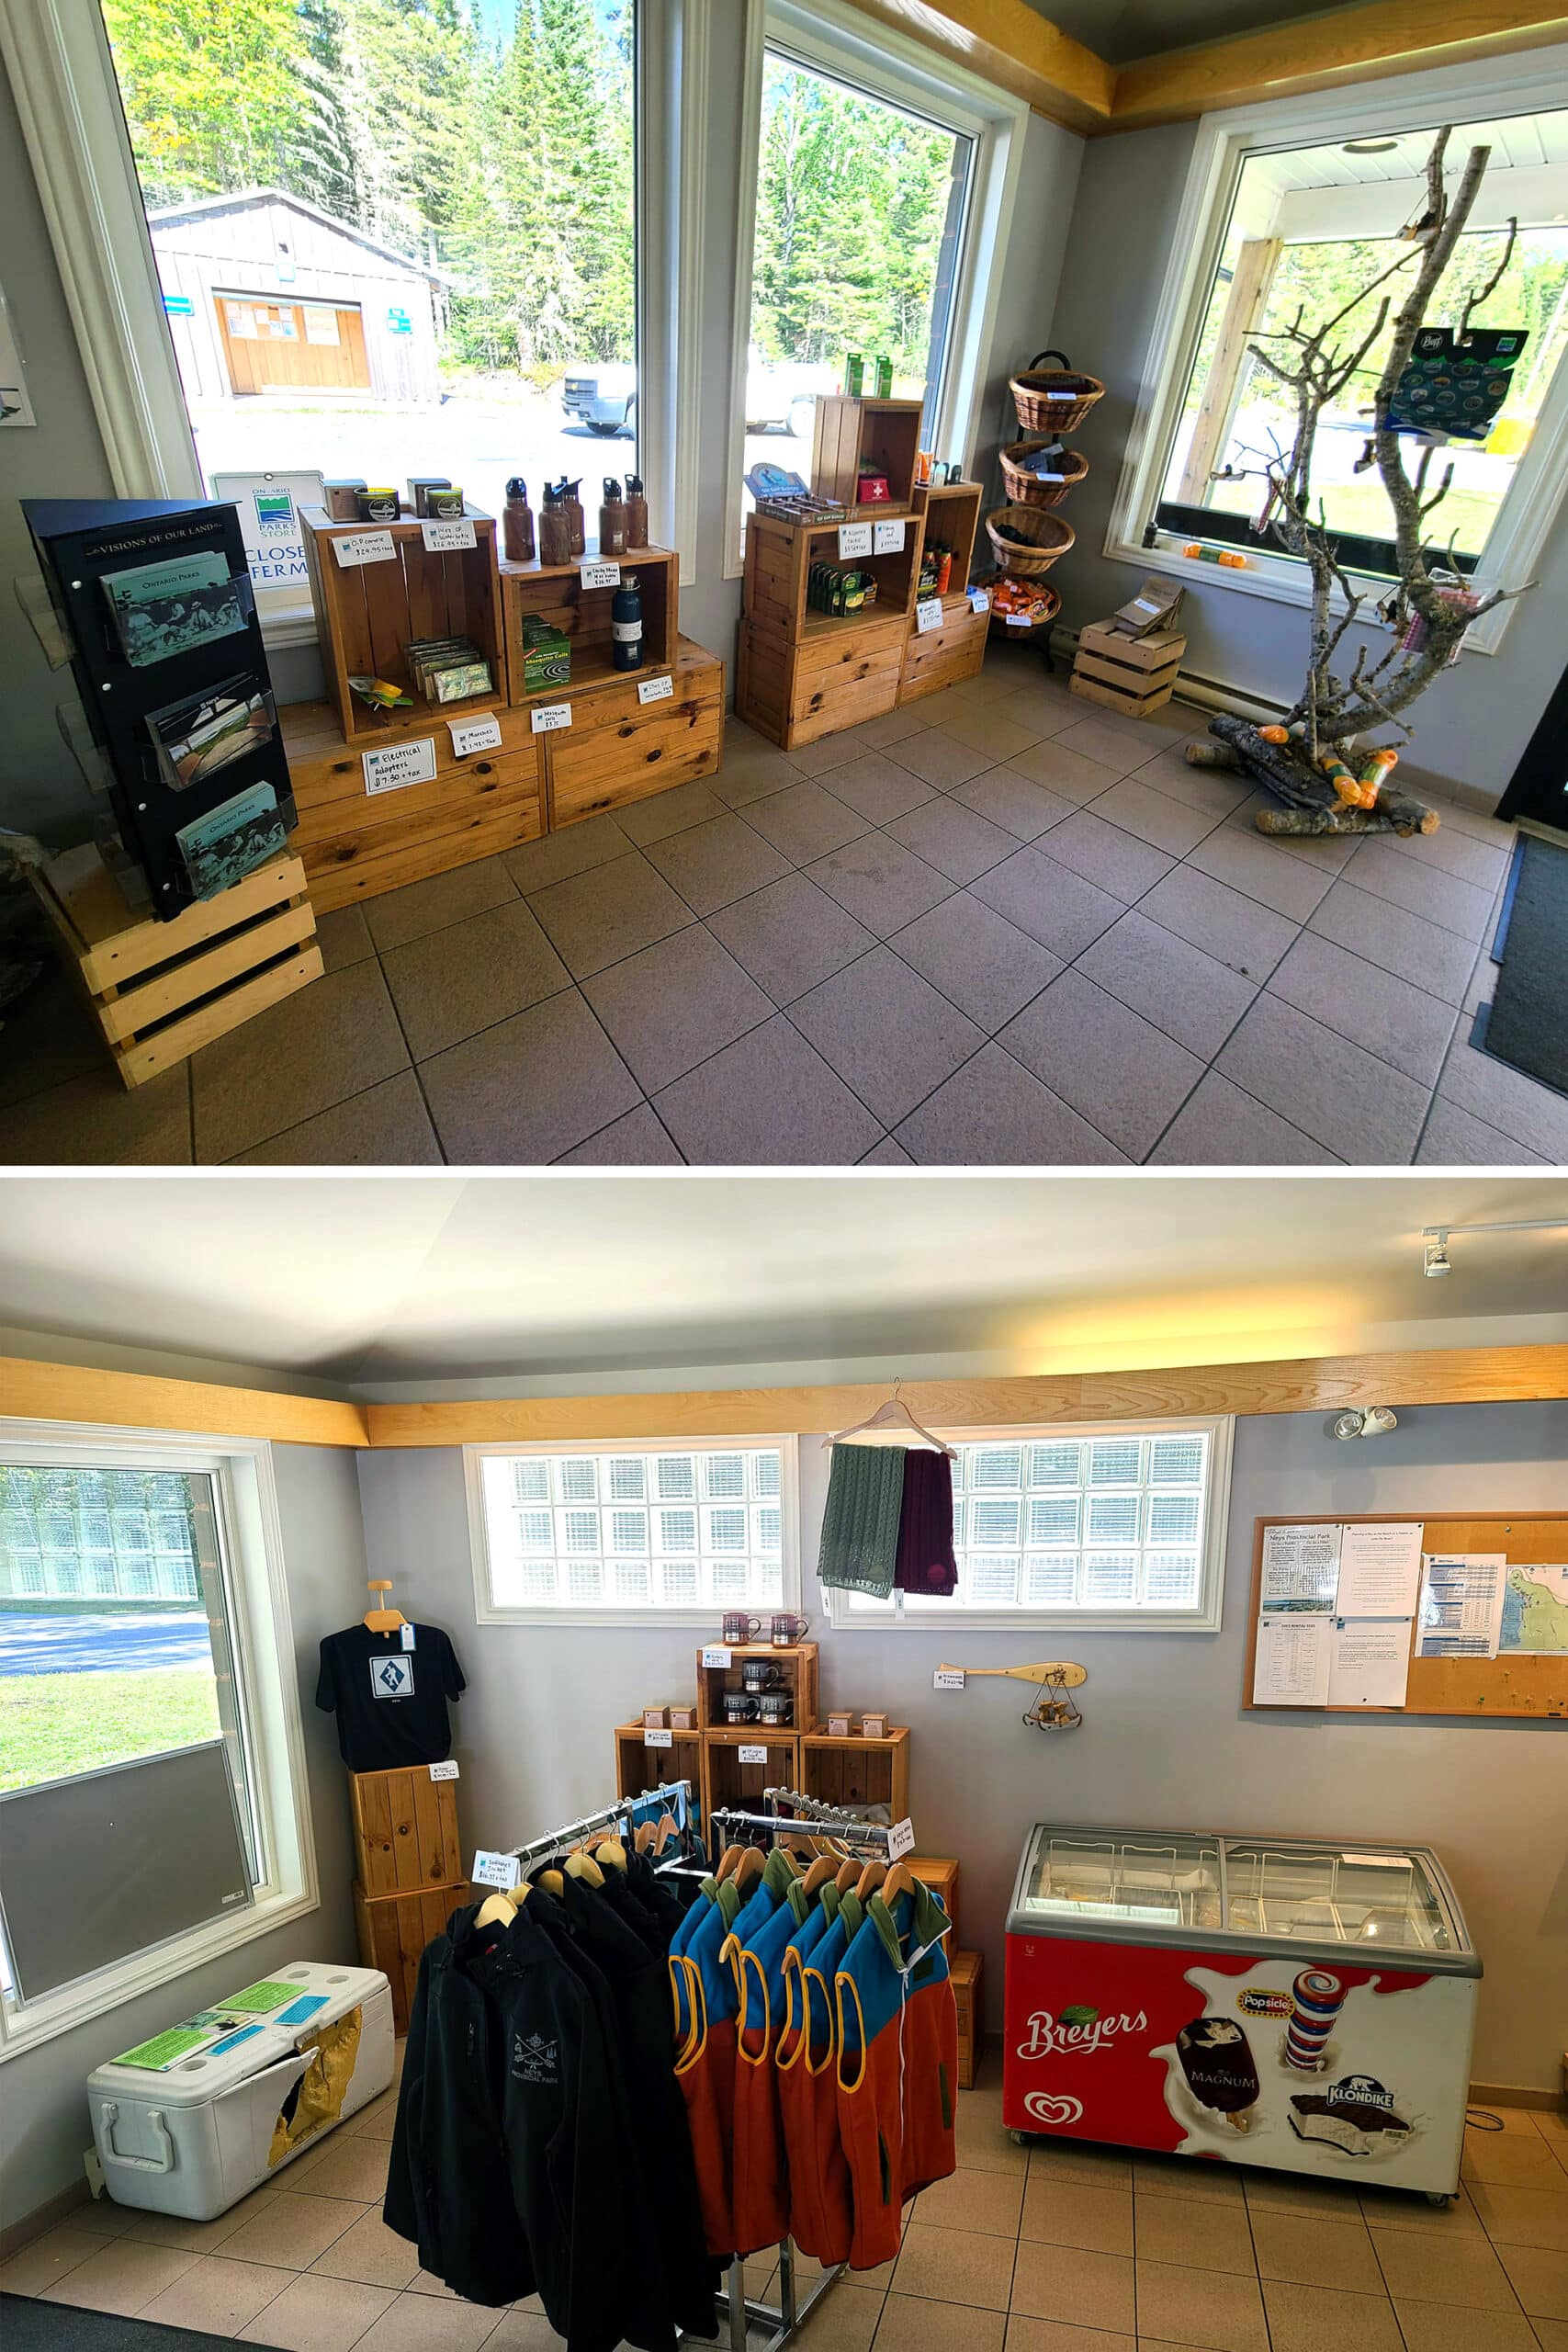 2 part image showing the interior of an ontario provincial park store.